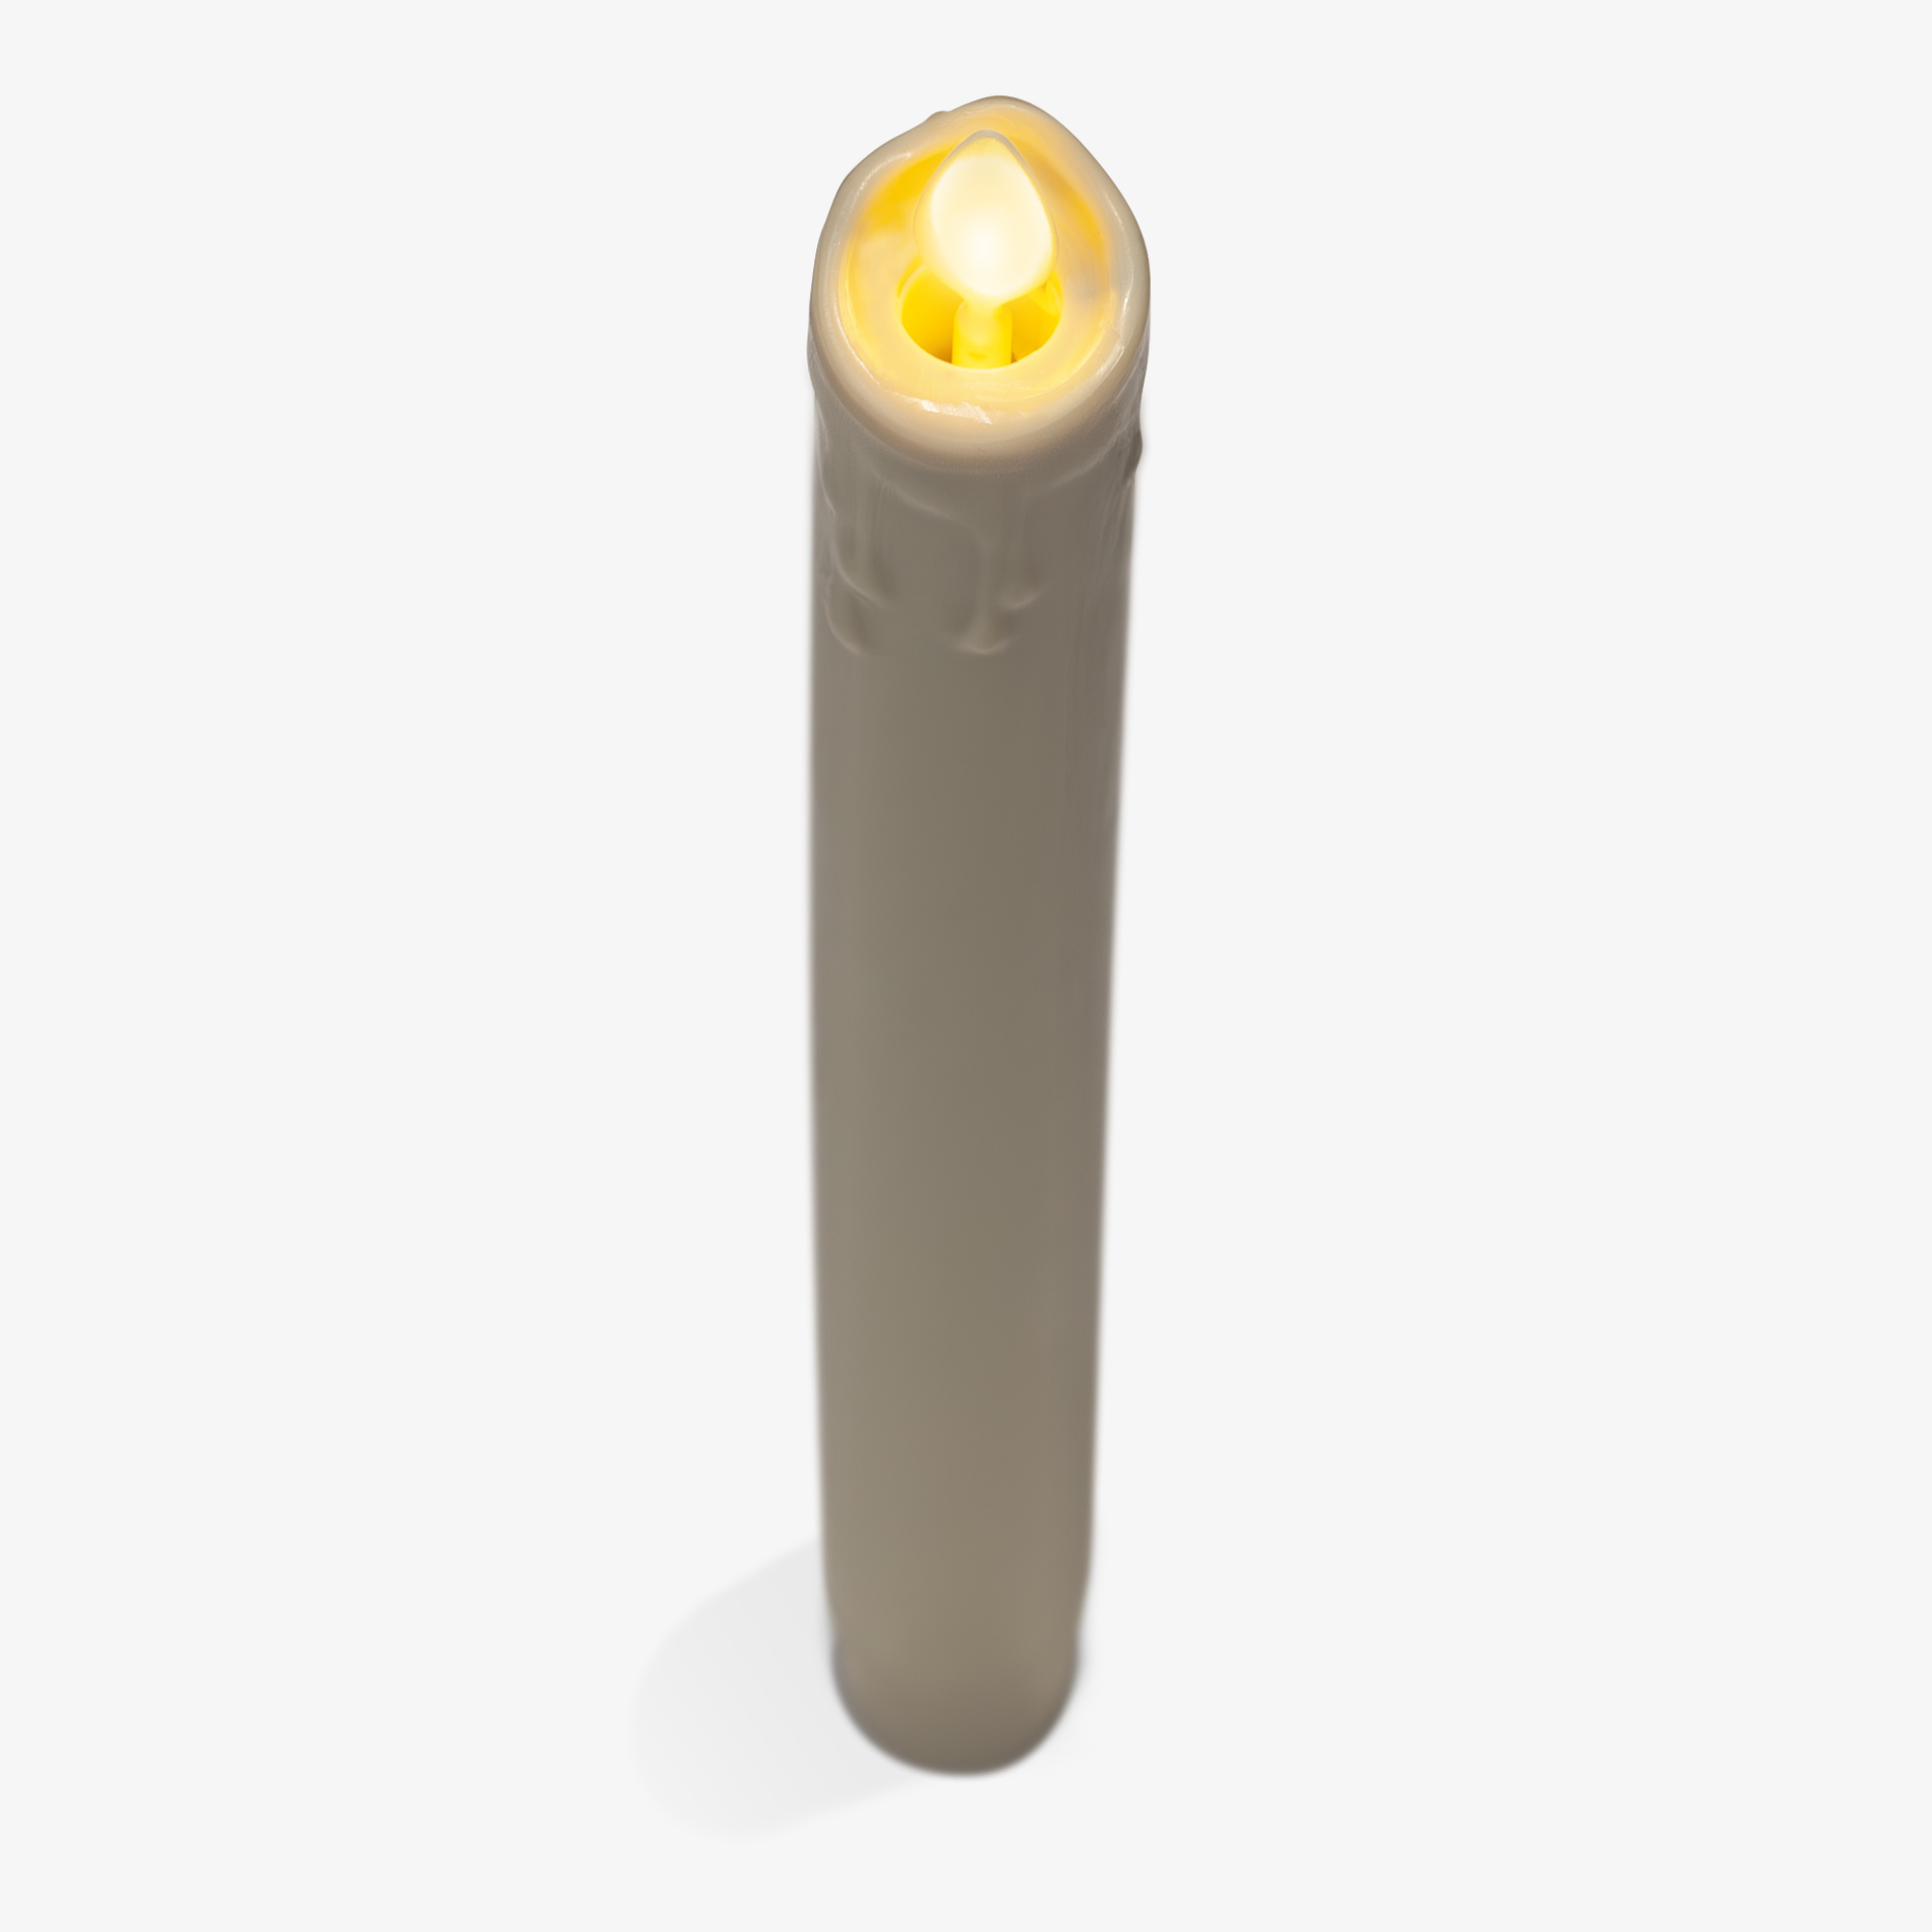 Radiance - Simply Ivory Clear Glass Pillar Candle - Poured Wax - Realistic  LED Flame Effect - Indoor - Unscented Wax 